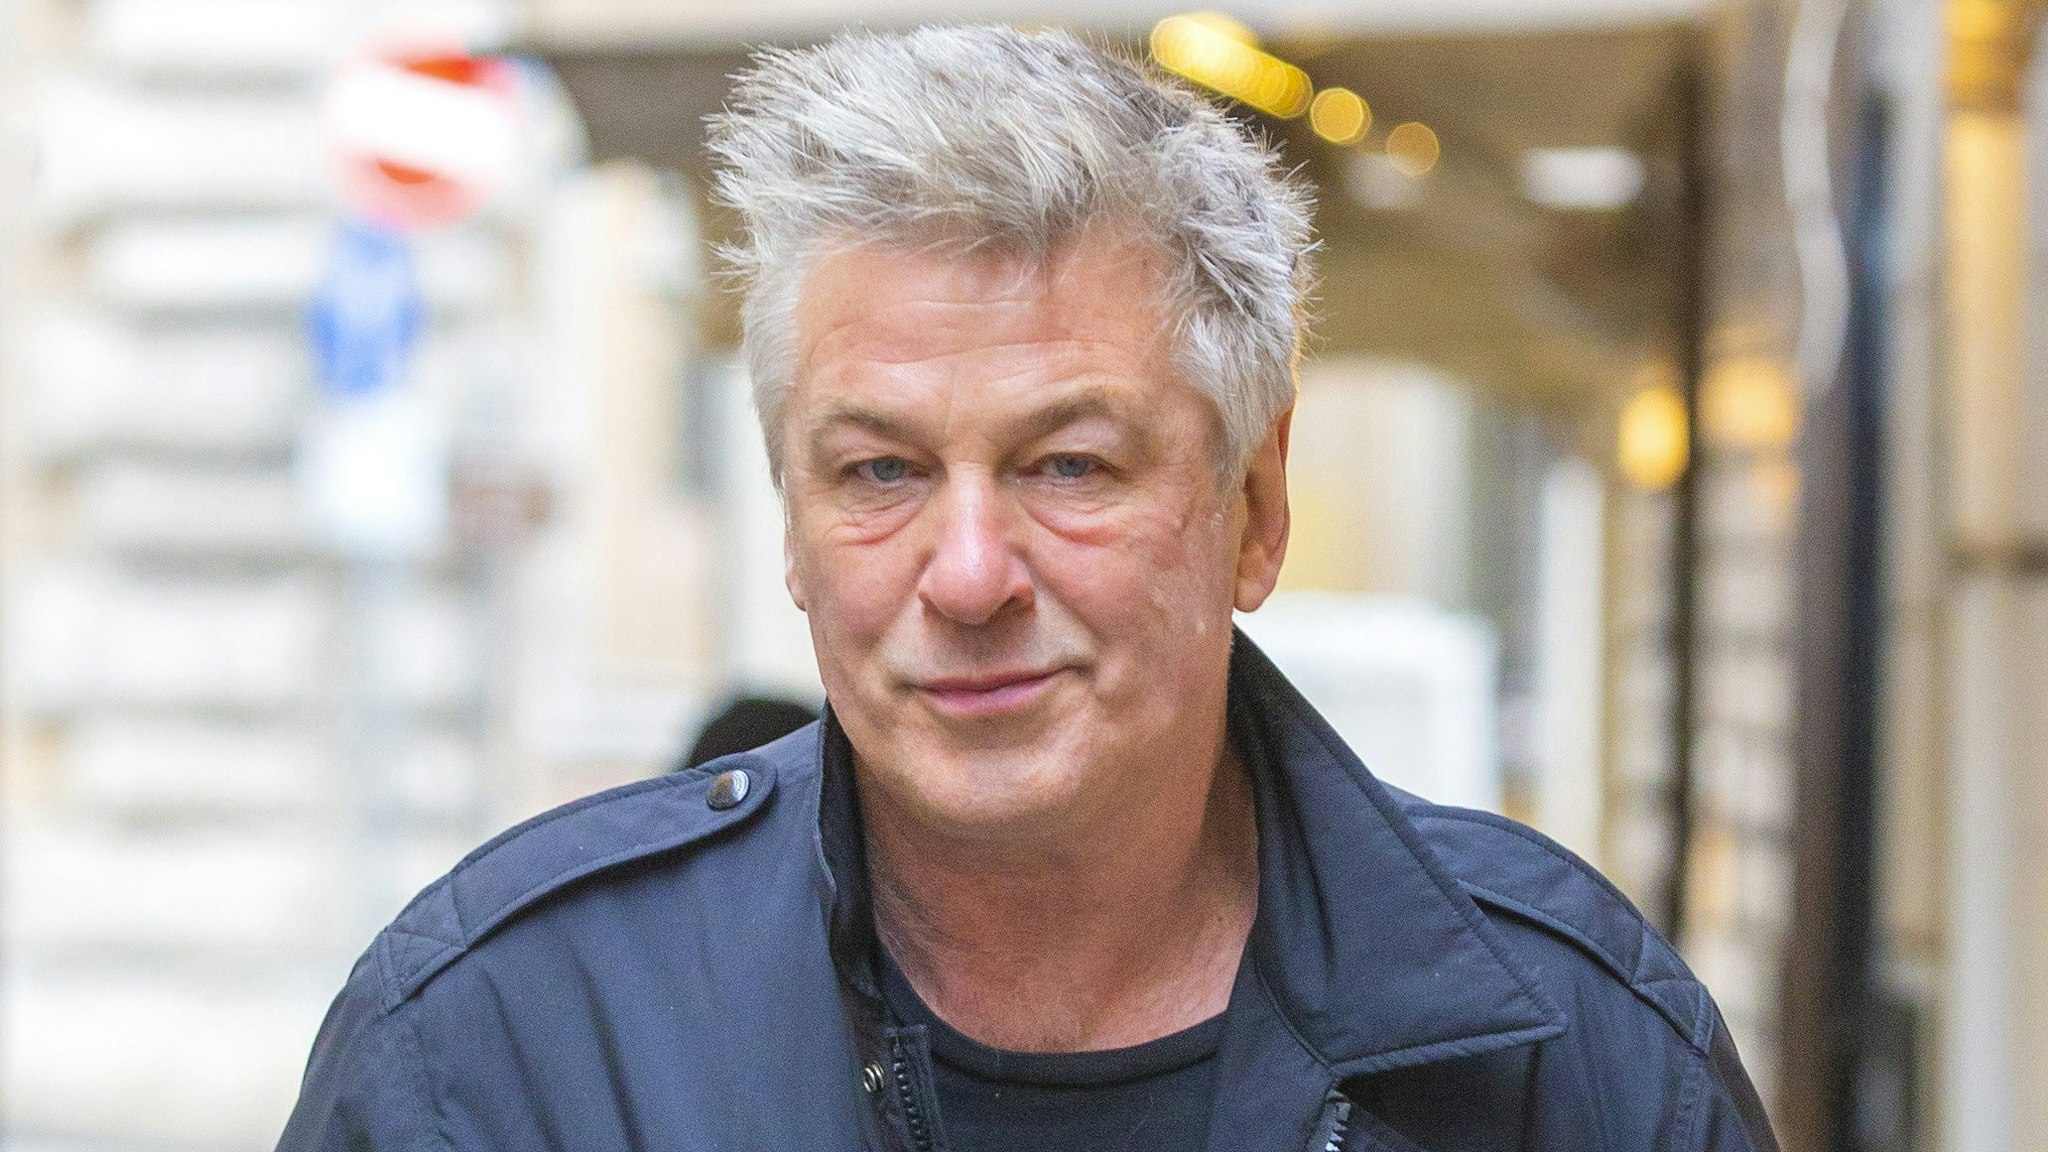 ROME, ITALY - APRIL 3: Alec Baldwin is seen on April 3, 2022 in Rome, Italy.